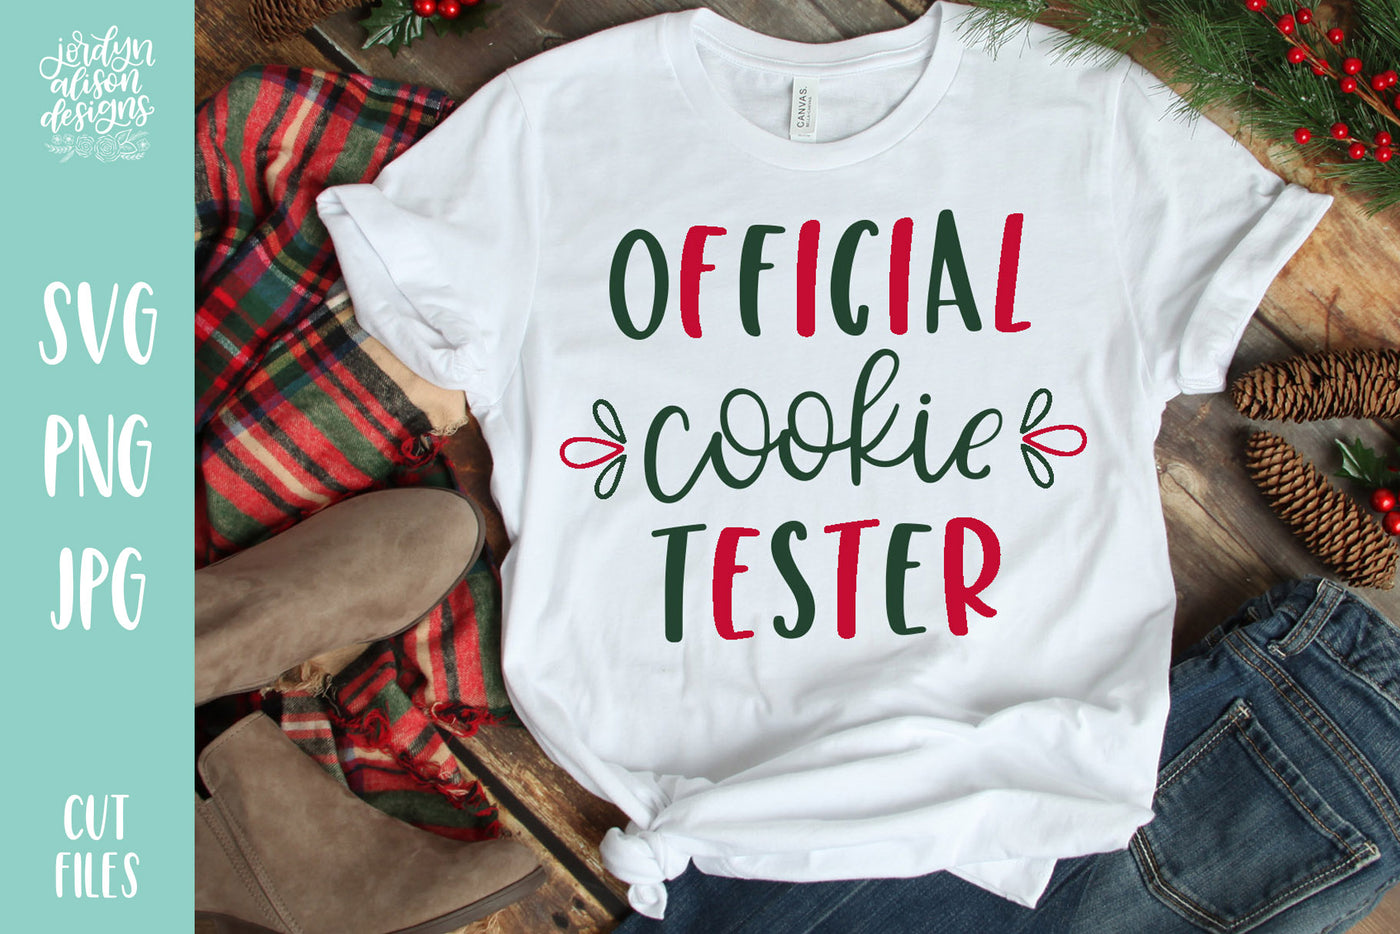 White T-shirt with handwritten text "Official Cookie Tester"